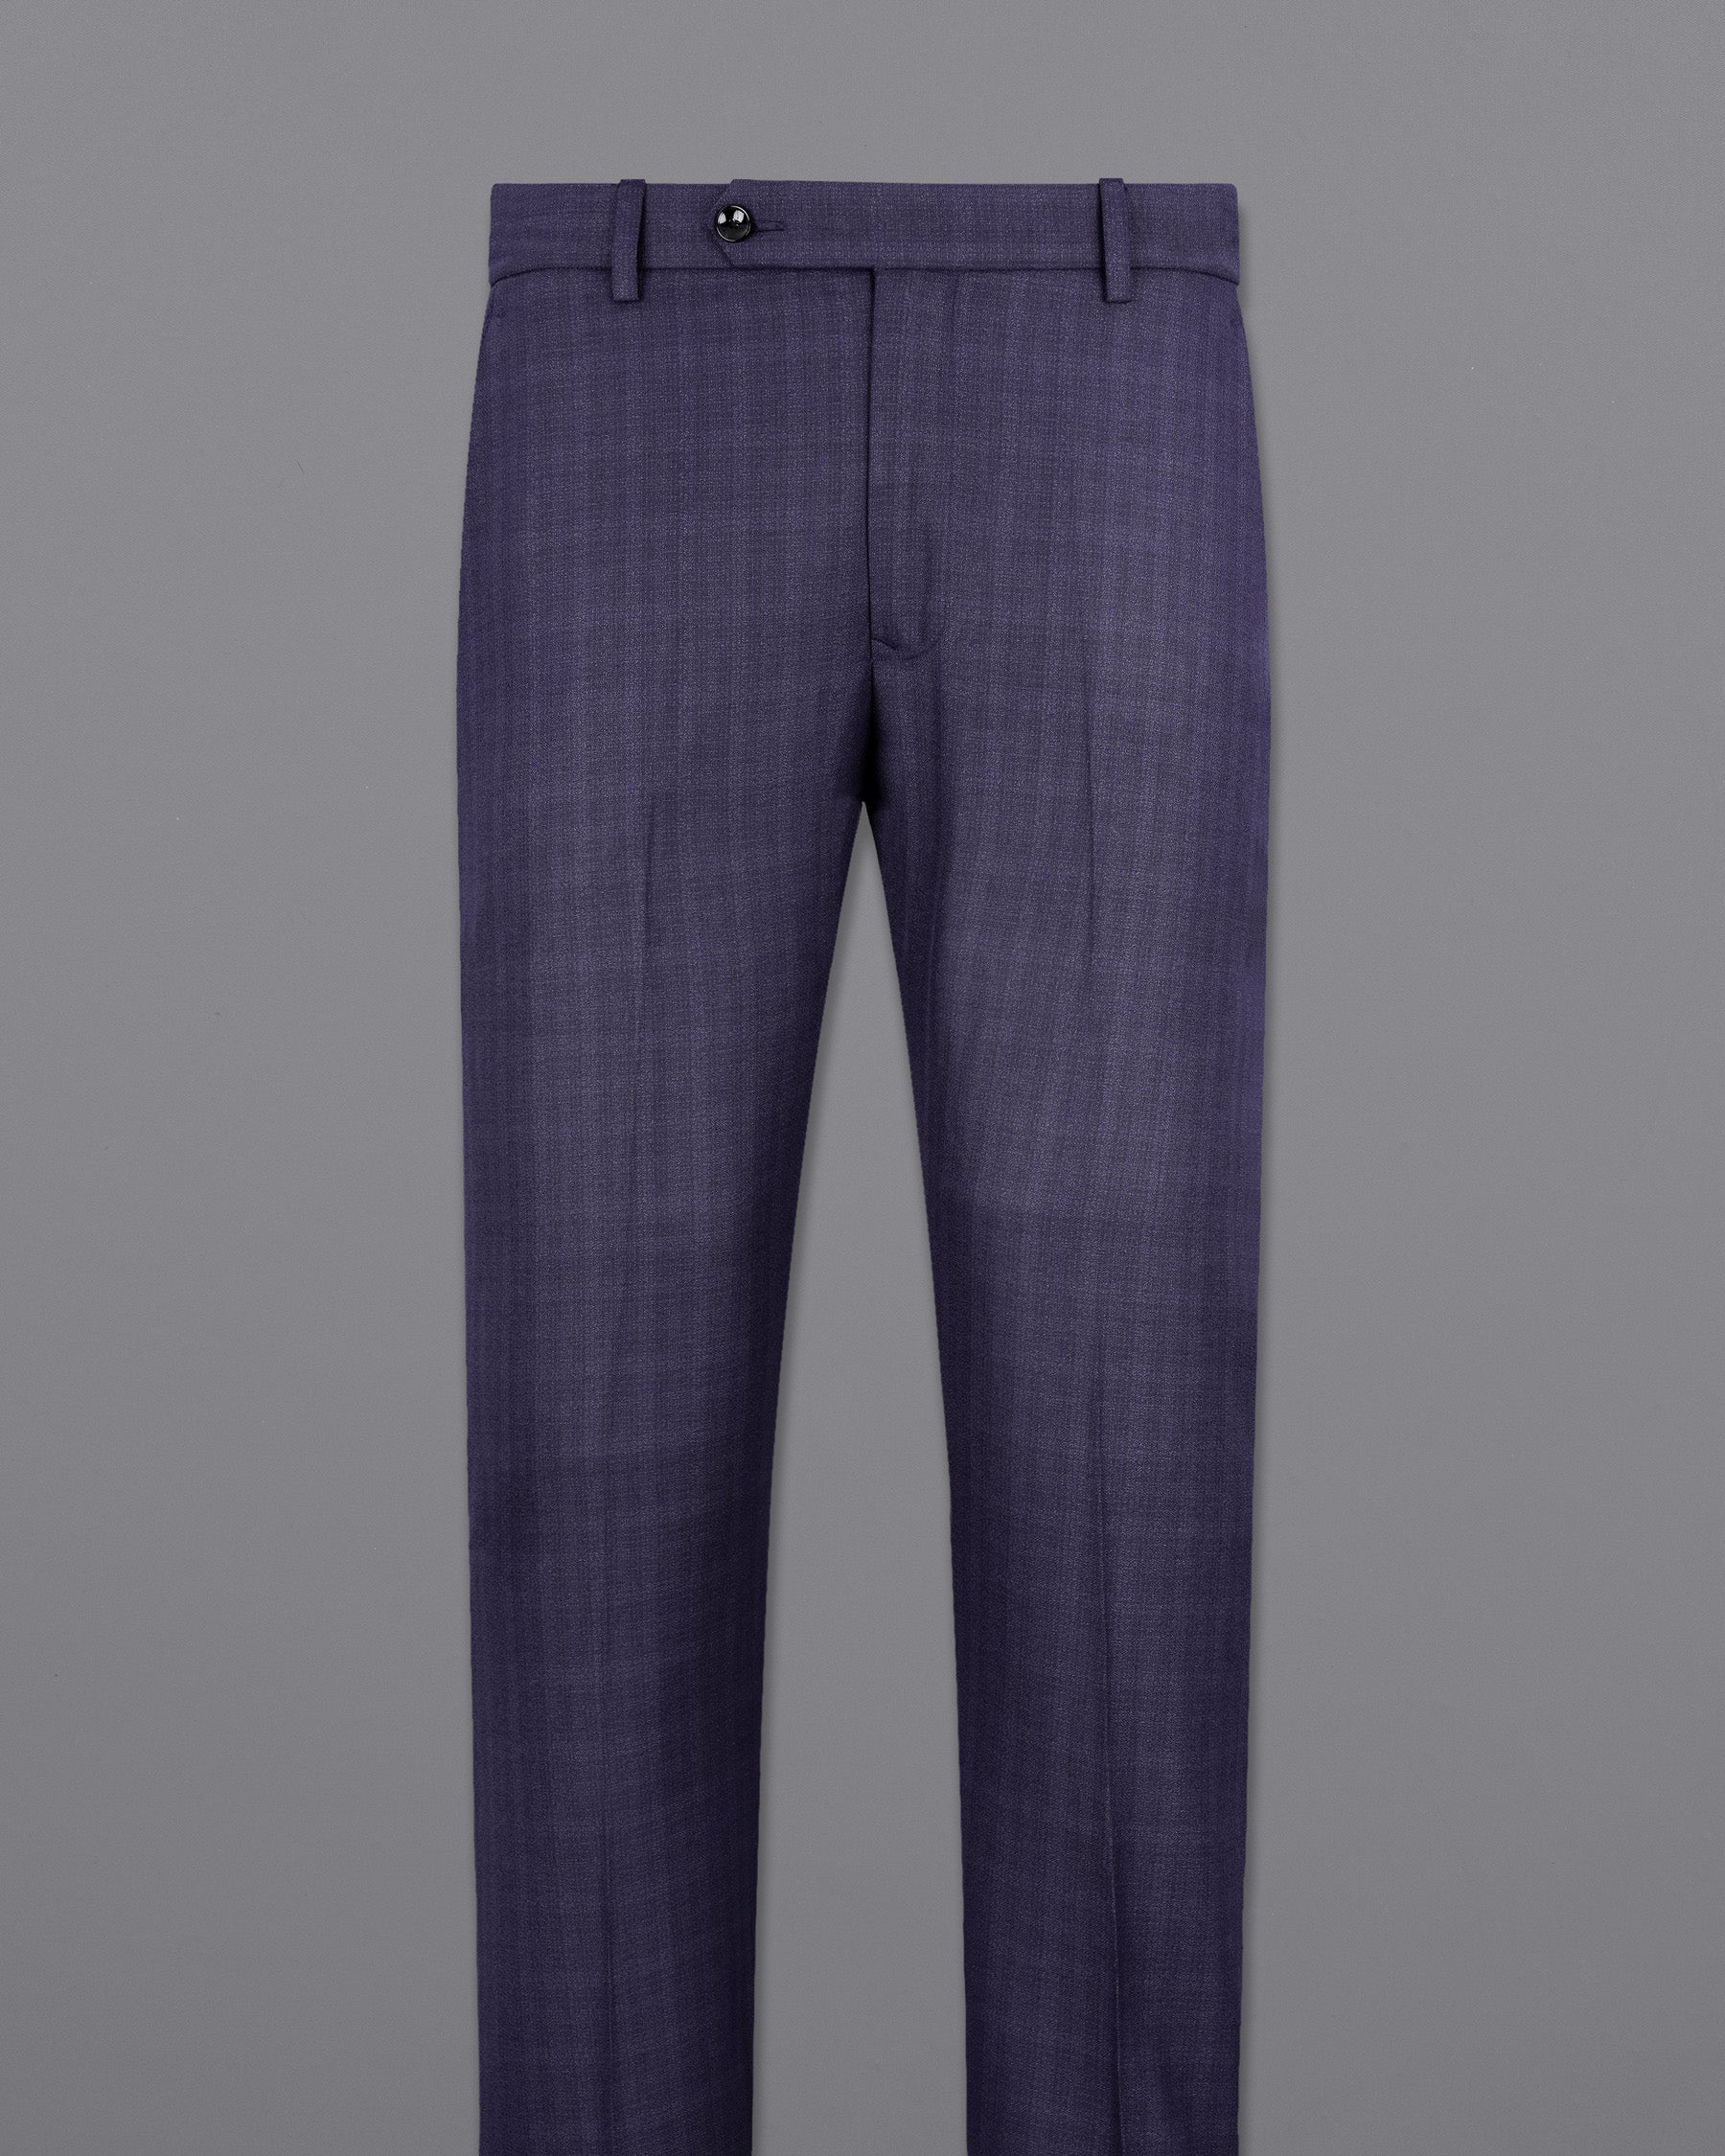 Martinique Navy Blue Subtle Checkered Single Breasted Suit